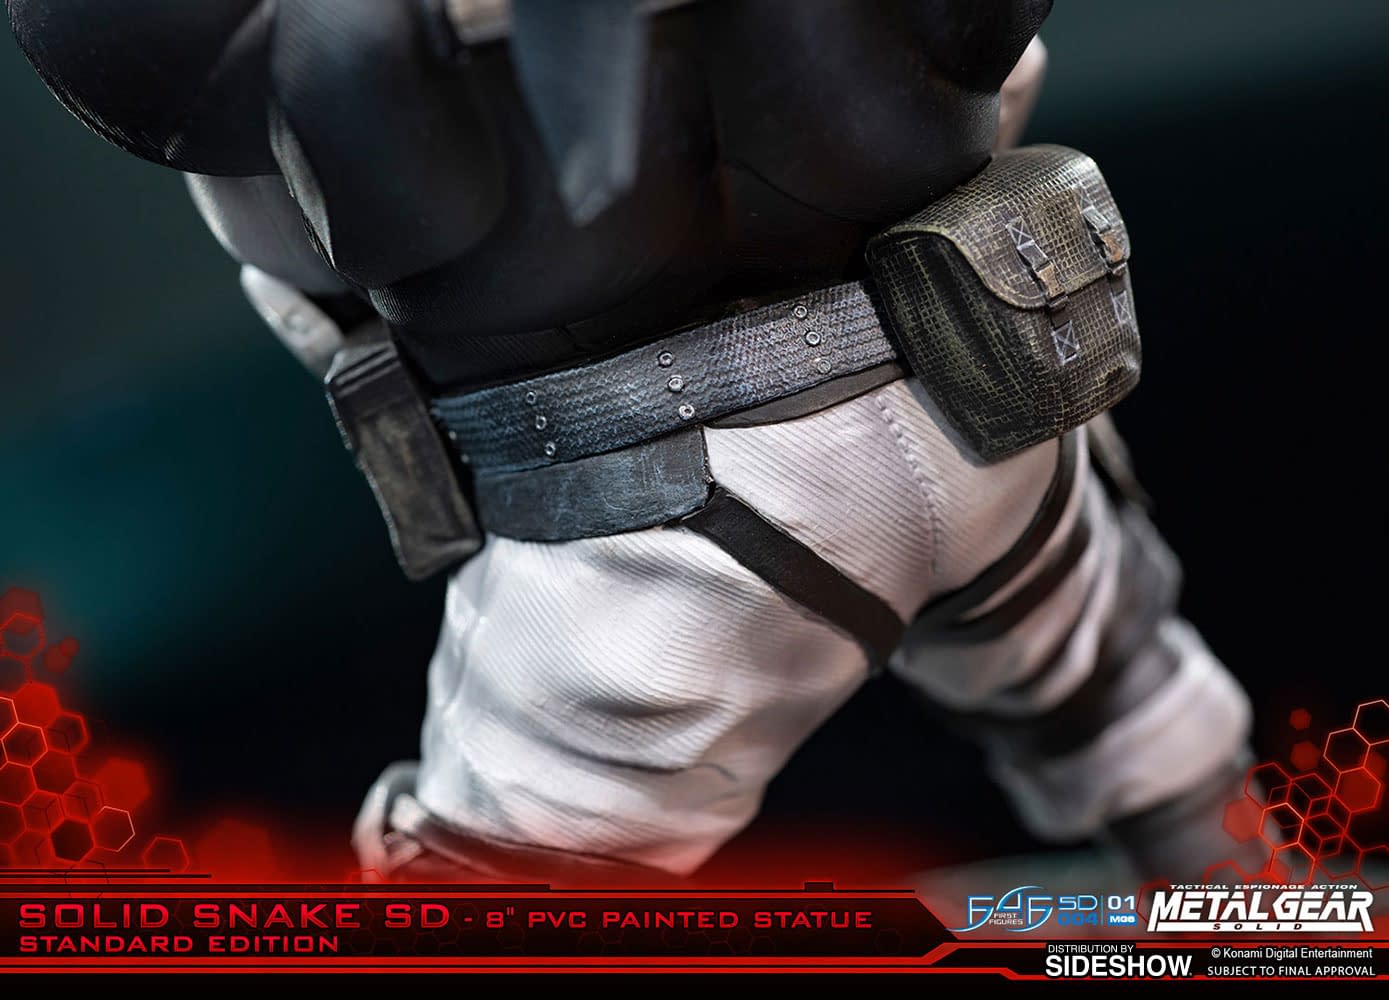 Solid Snake Returns with New "Metal Gear Solid" First 4 Figures Statue